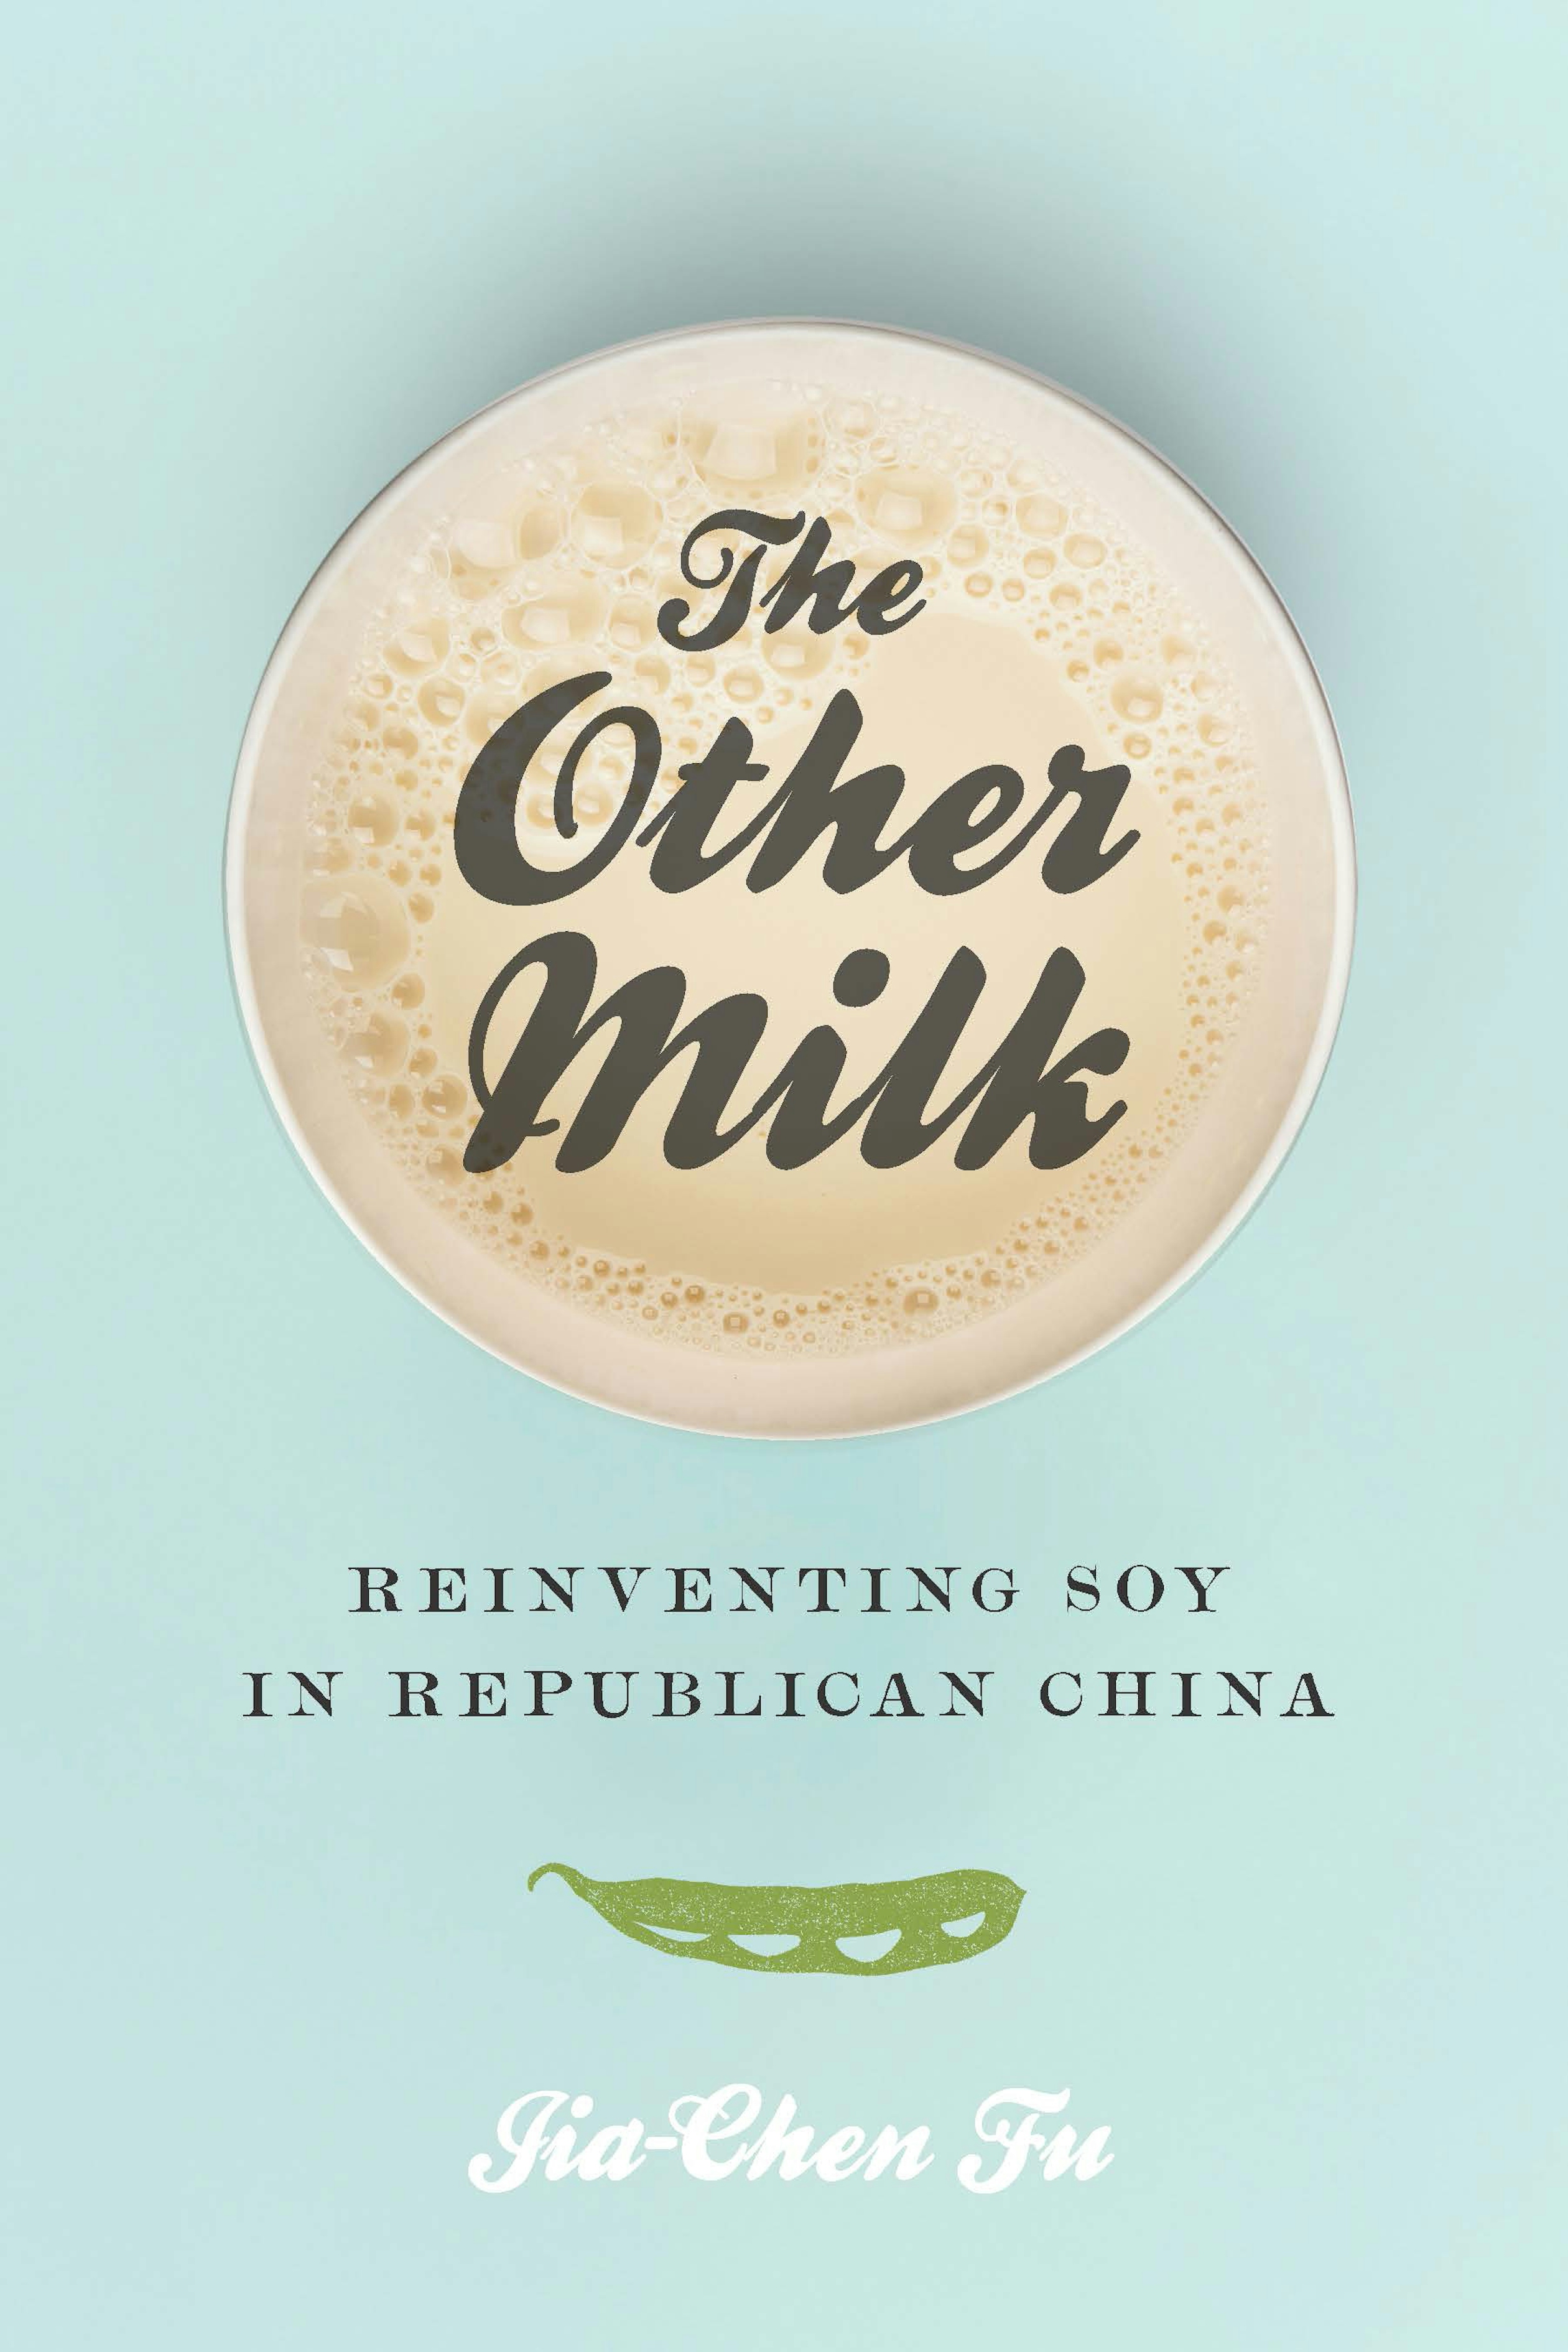 The Other Milk